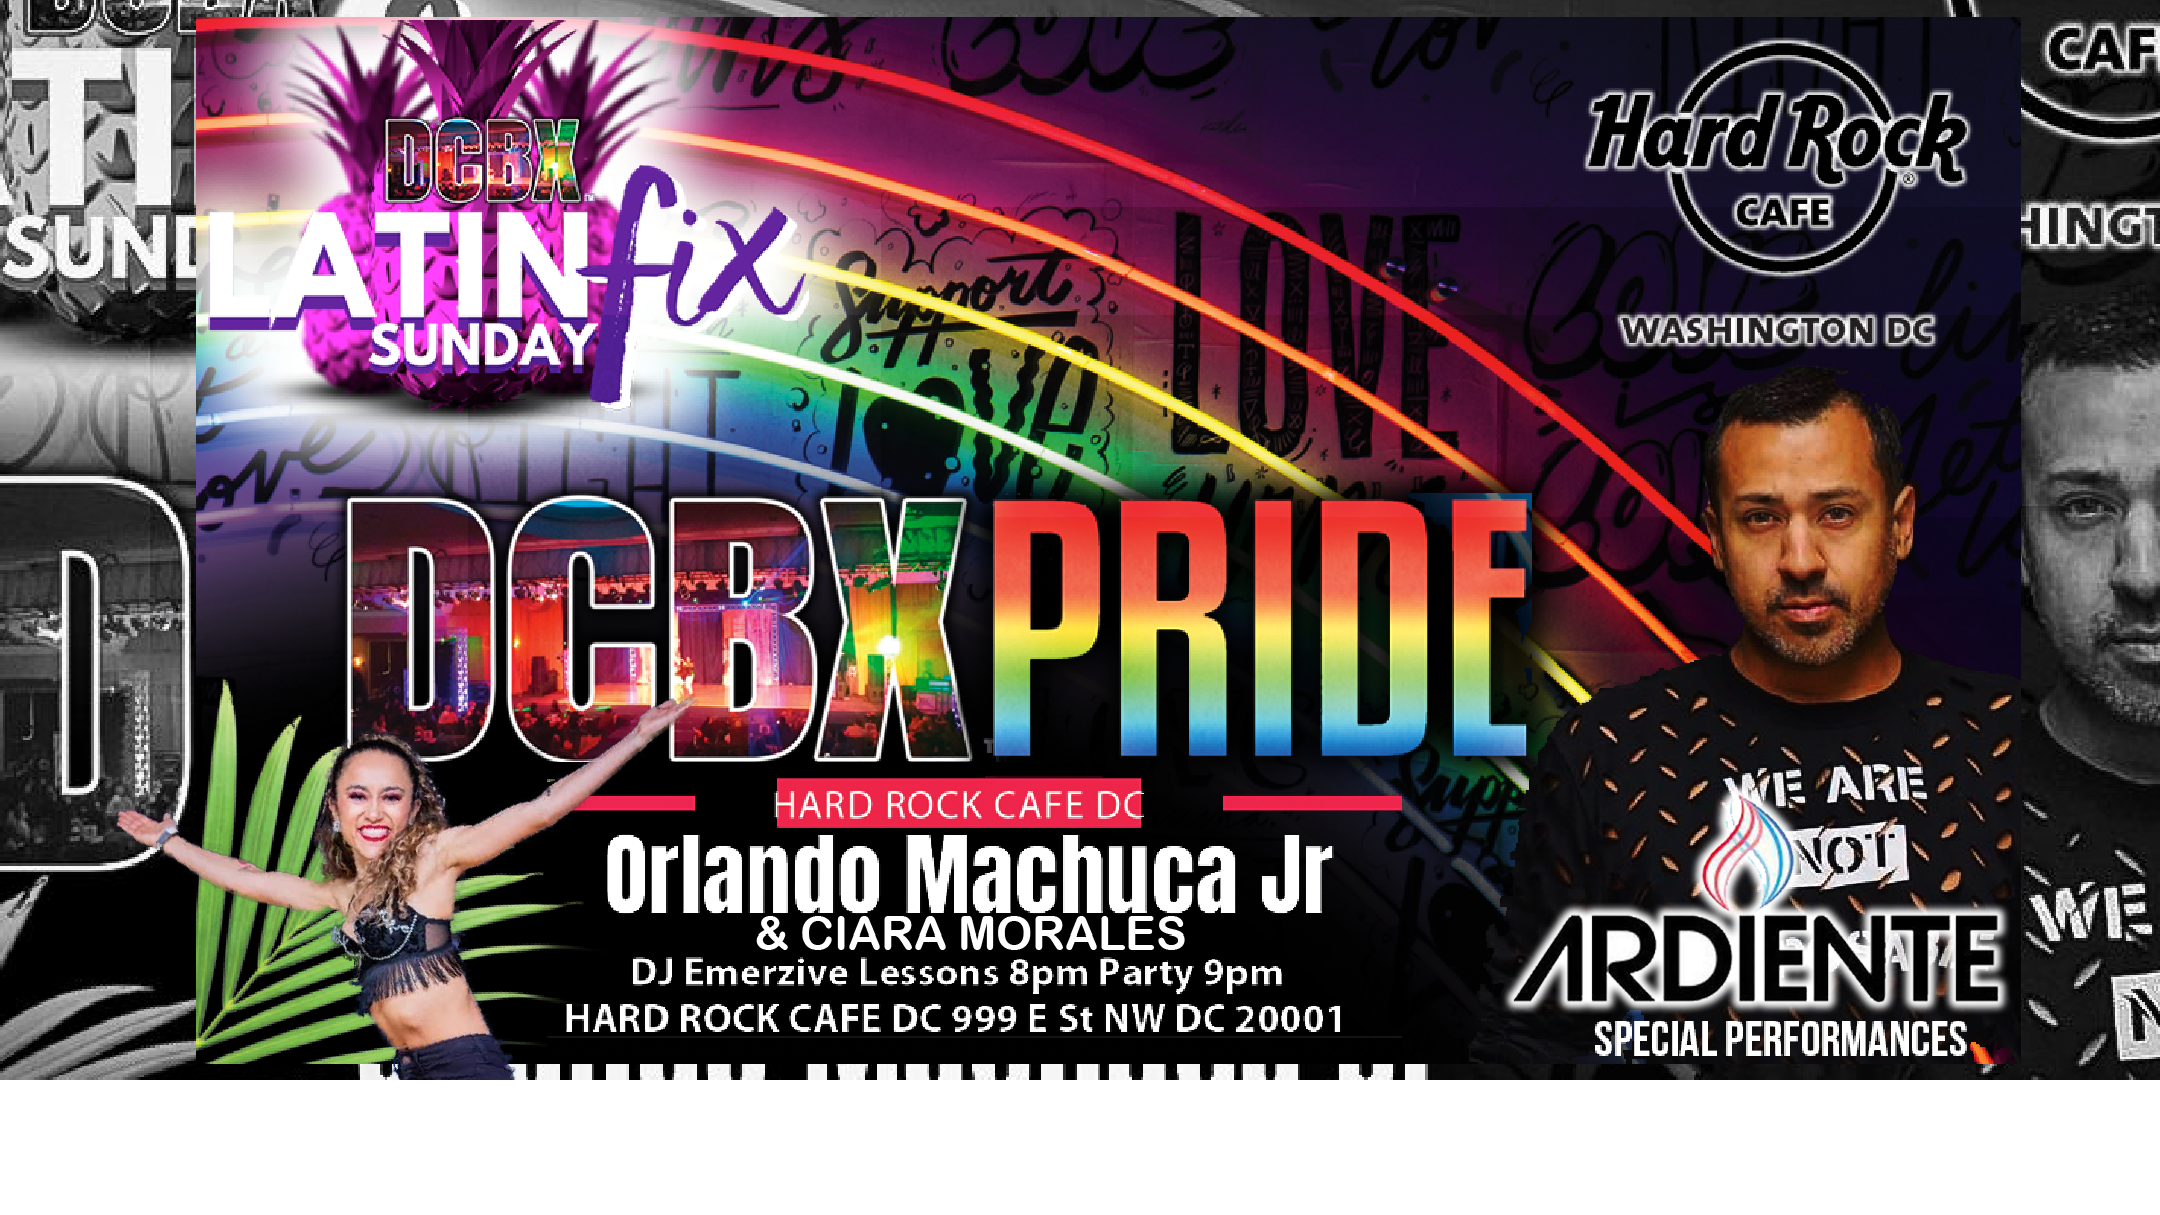 Photo for DCBX PRIDE EDITION LATIN FIX SUNDAY'S - Salsa & Bachata at Hard Rock Cafe DC! on ViewStub